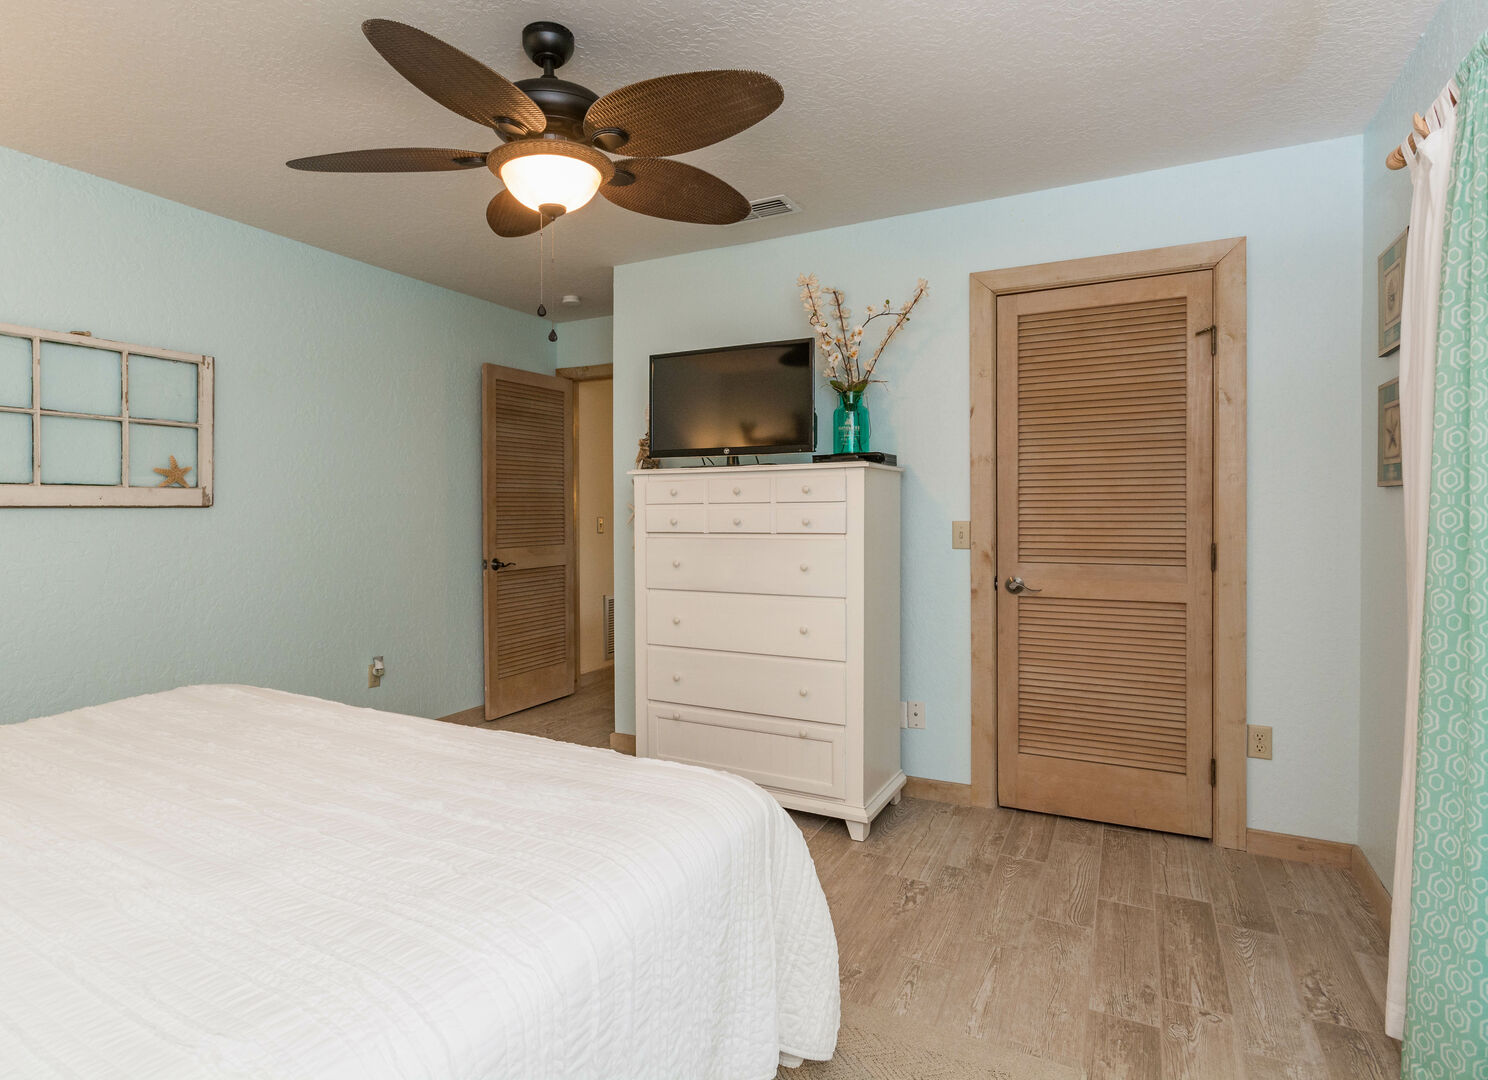 Bedroom with tall white chest of drawers and wood door featuring wood floors.